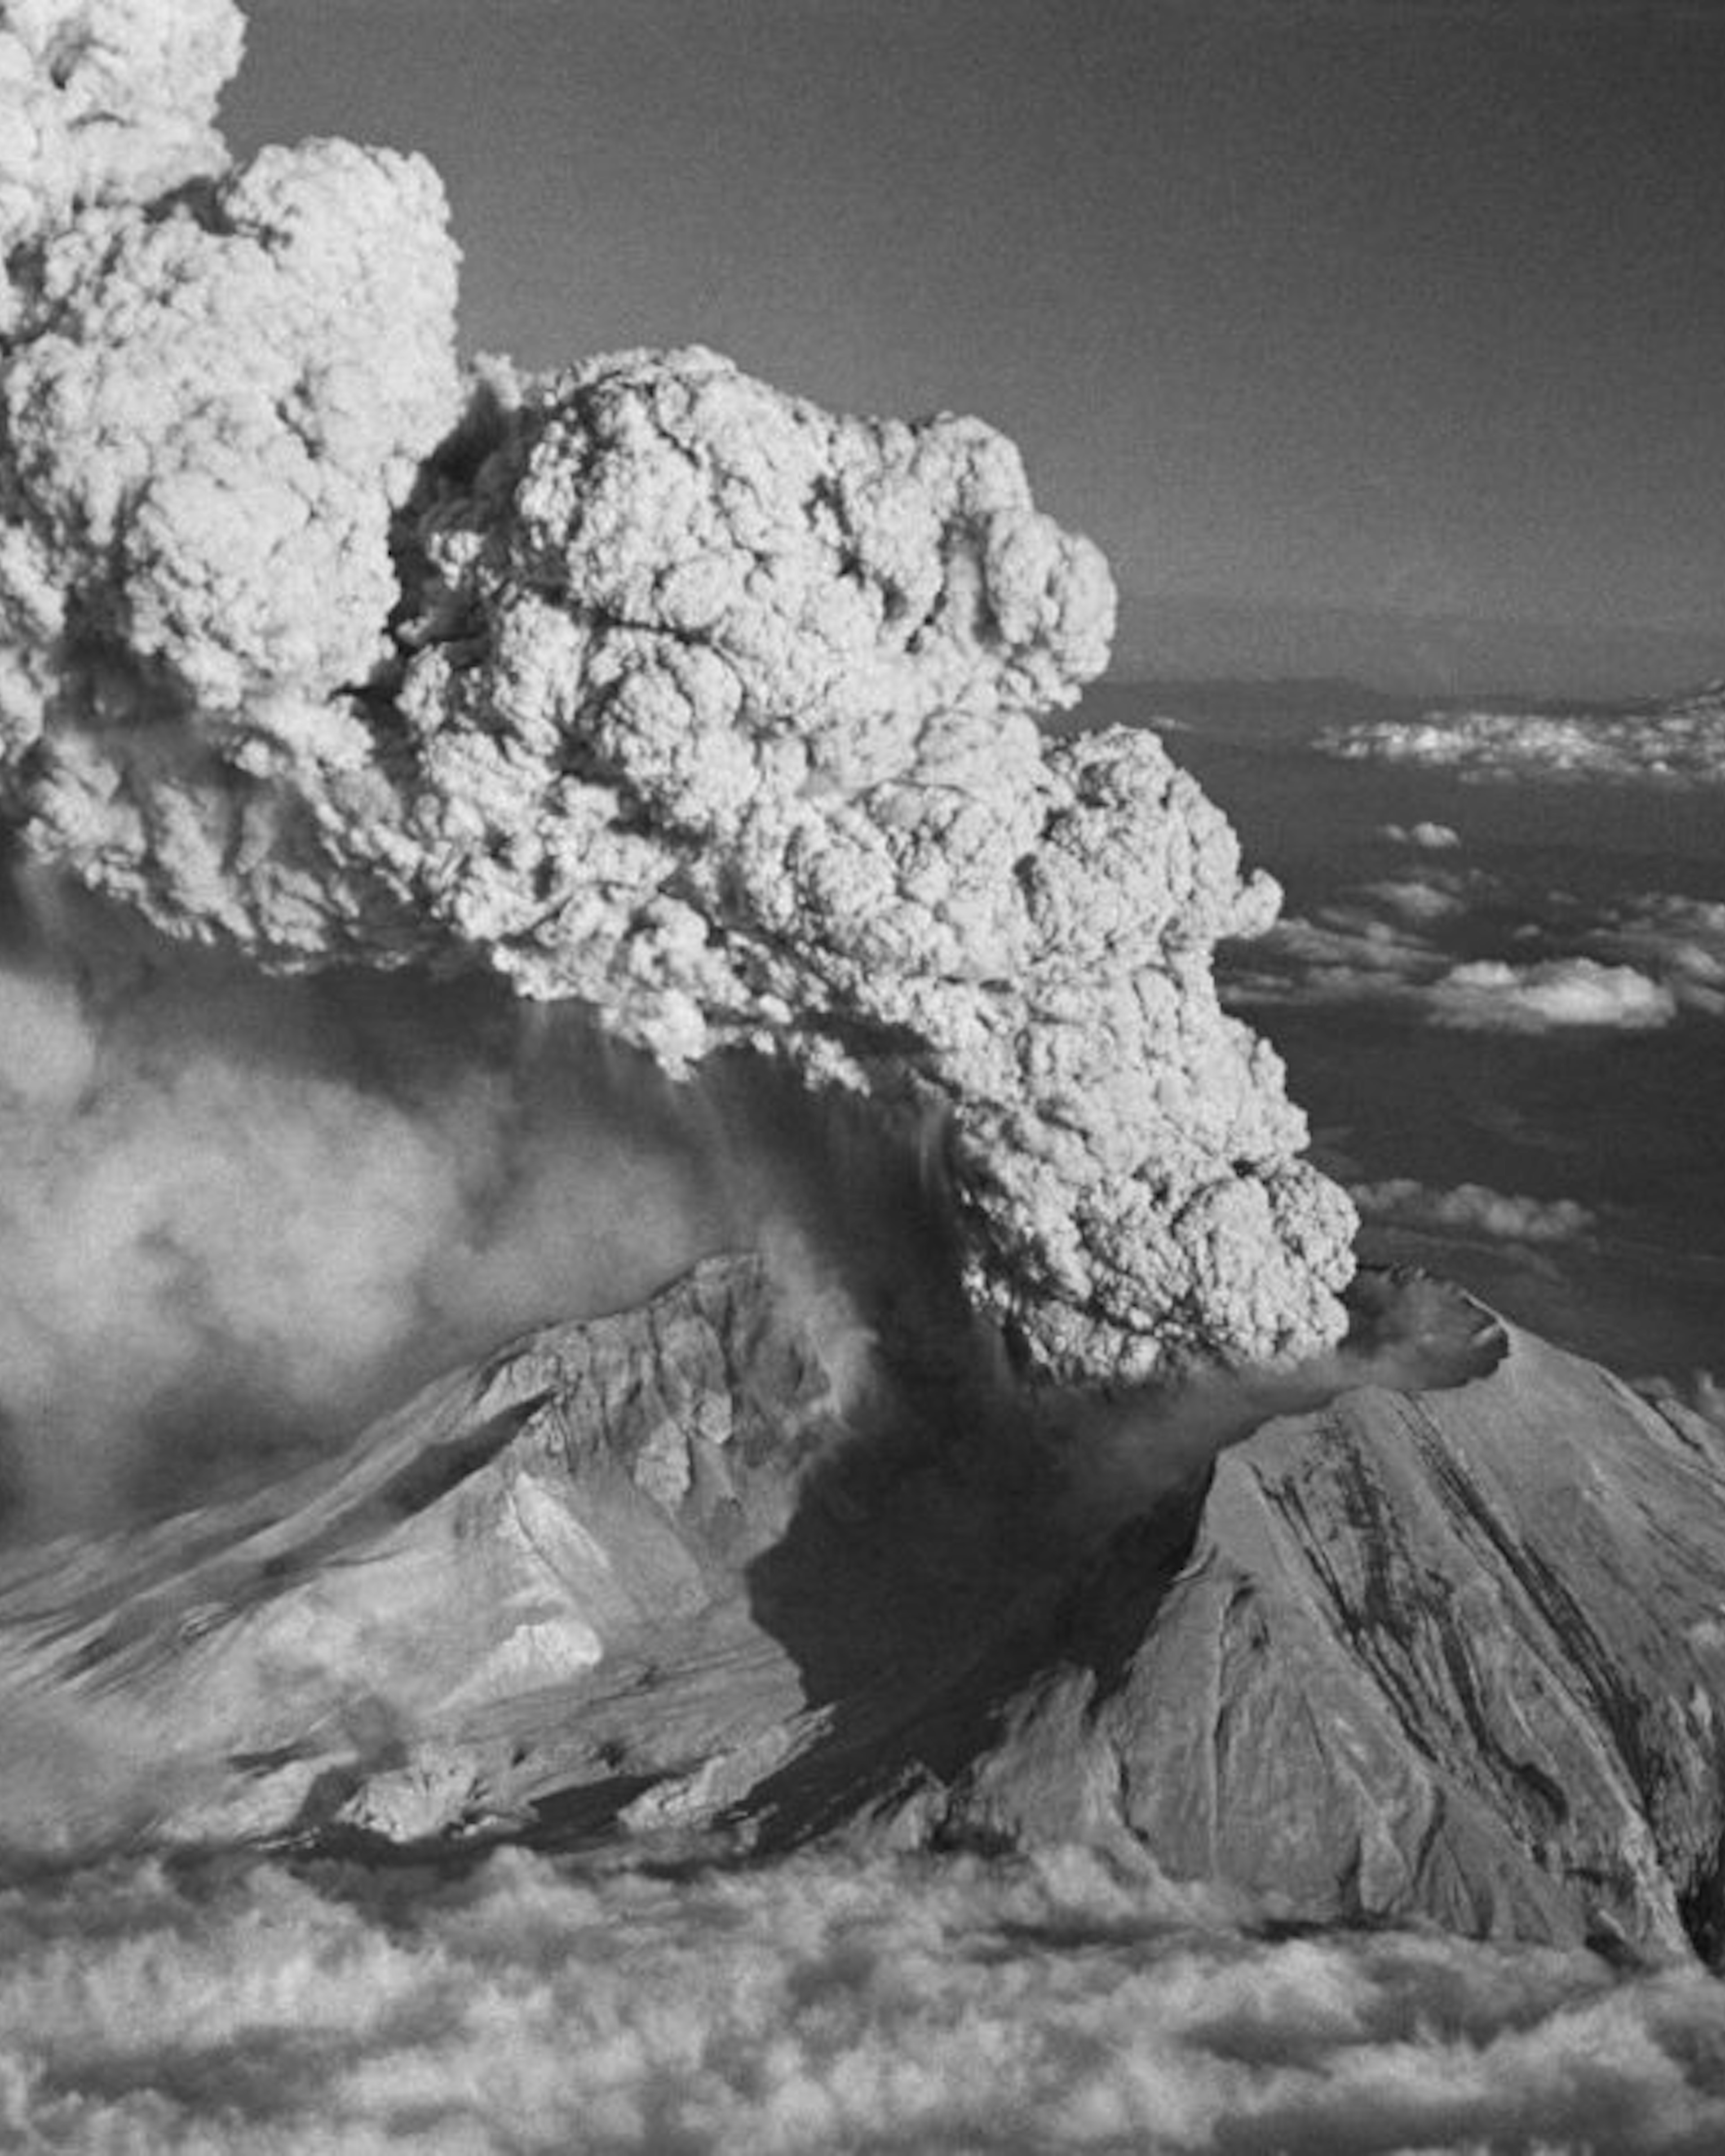 (Original Caption) "BLOWS TOP AGAIN." SPIRIT LAKE,WASH.: WITH MOUNT HOOD (RIGHT,REAR) VISIBLE IN THE BACKGROUND, MOUNT ST.HELENS ERUPTS JULY 22. THE PLUME OF STEAM AND ASH ROSE SOME 60,000 FEET IN THE AIR, SENDING ASH IN A NORTHEASTERLY DIRECTION. MOUNT ST.HELENS BROKE A SIX-WEEK SILENCE WITH A SERIES OF TOWERING ASH ERUPTIONS. JULY 29,1980.